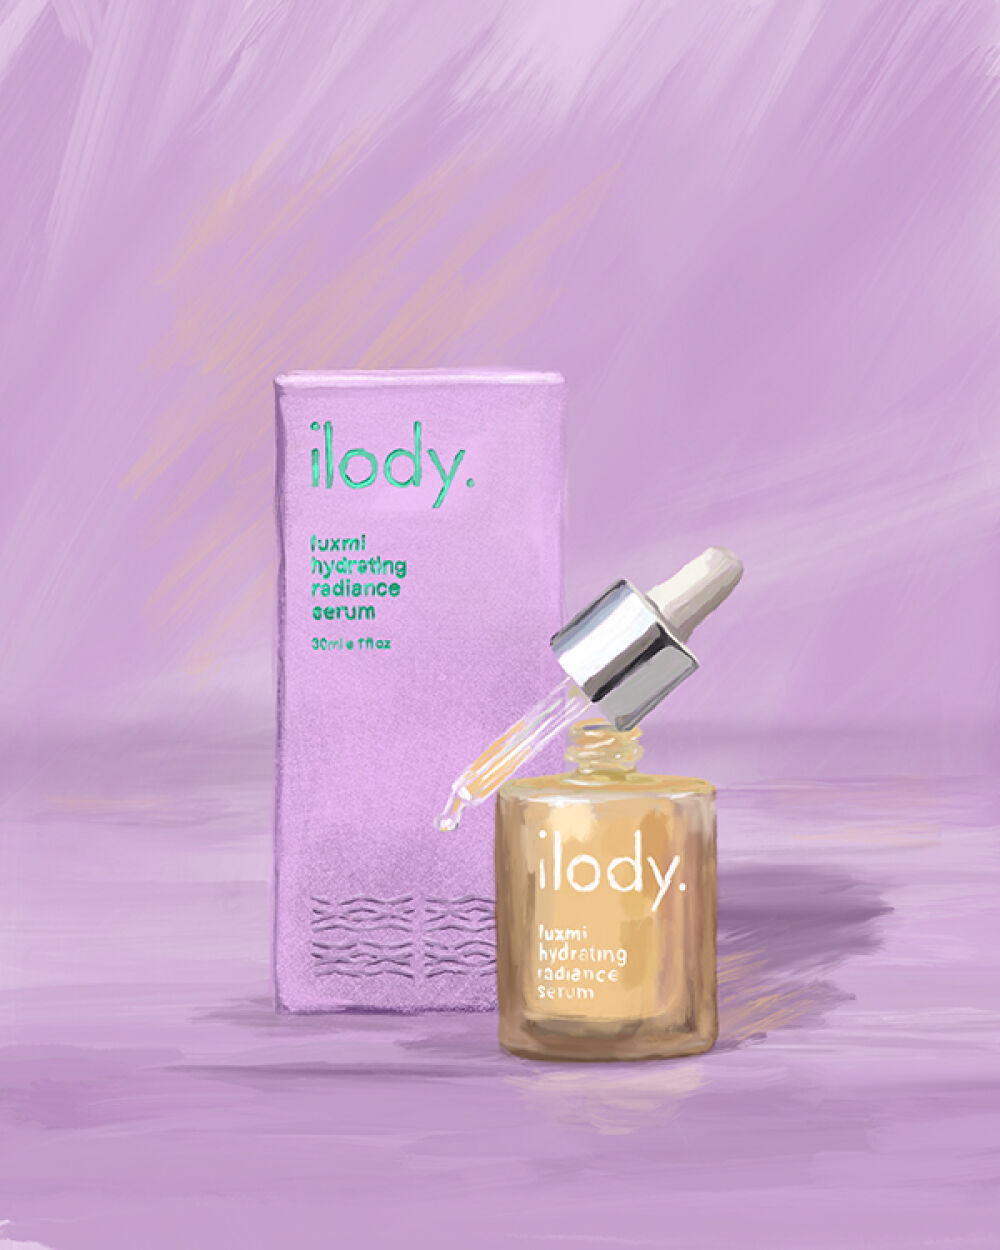 Packaging and brand identity illustration by Christina Gliha for Ilody Skincare